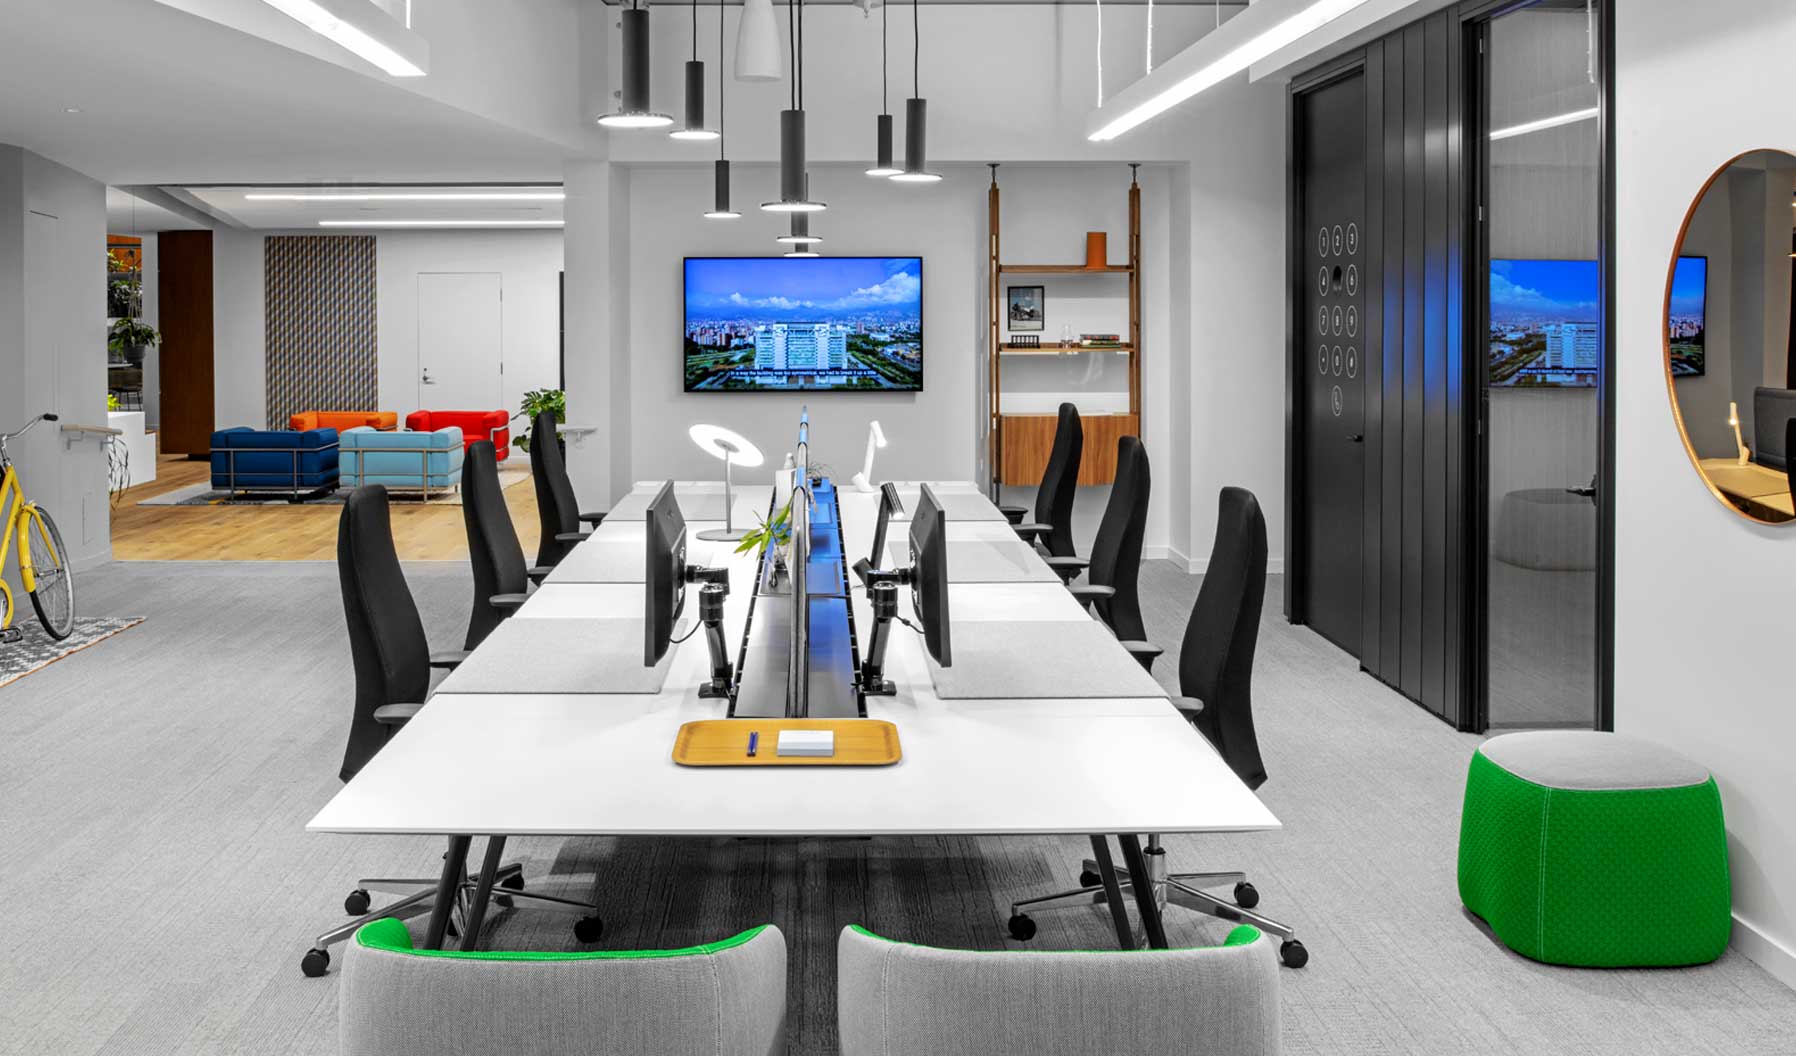 Technology has enabled people to work anywhere, anytime, requiring organizations to seek flexible, adaptable workspace solutions that accommodate mobile workers. People who work in a variety of locations during the day choose environments that best accommodate their needs, like touchdown spaces where they can recharge devices and connect with colleagues.